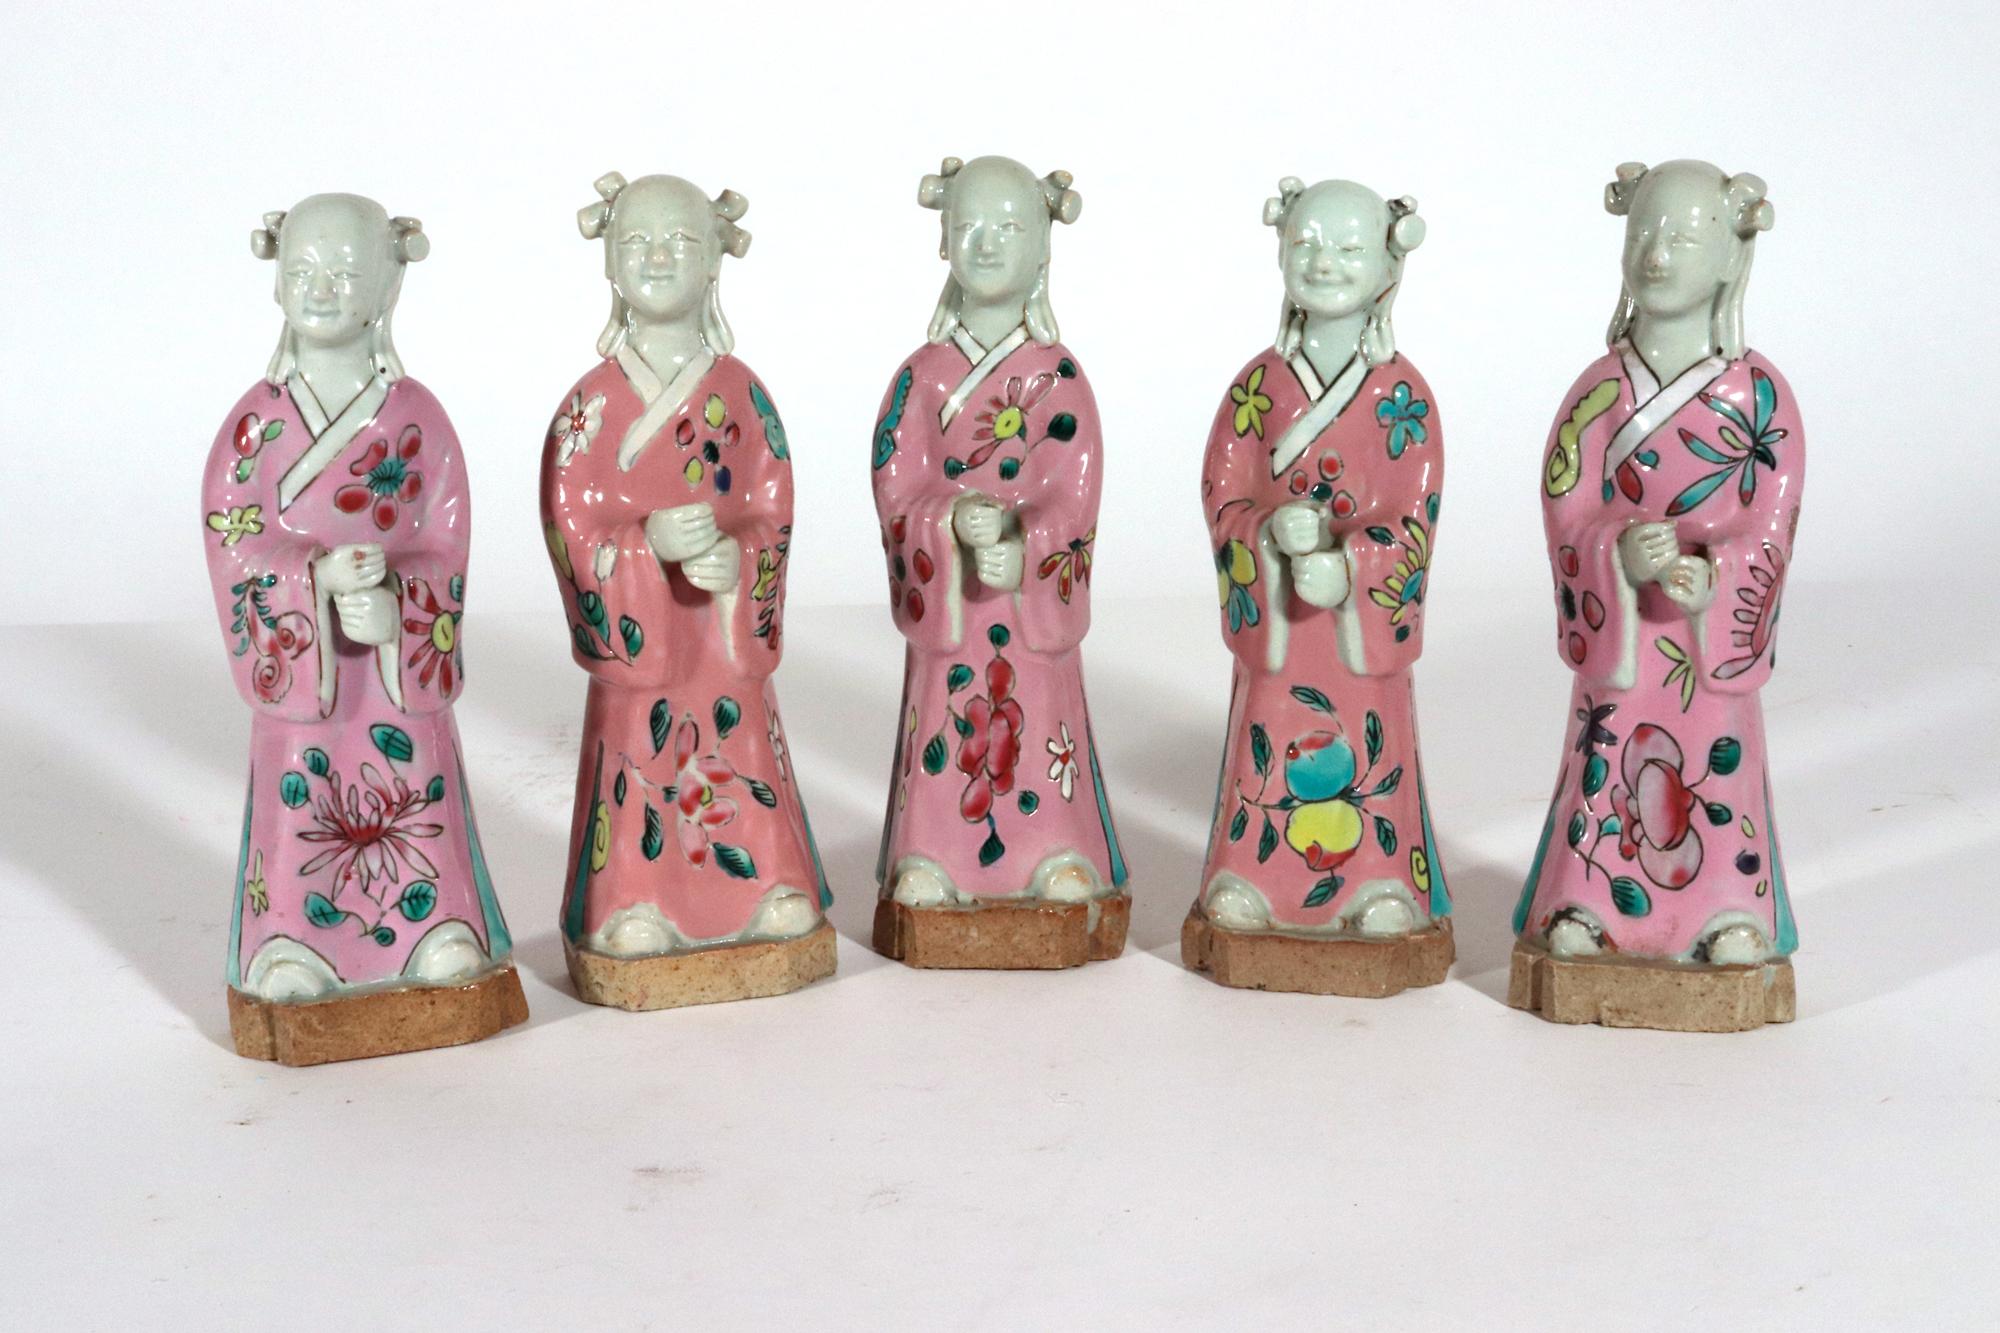 Chinese Export Porcelain Figures of Attendants,
Set of Five,
Circa 1780

The set of five Chinese Export porcelain figures are painted in famille rose enamels with a purple robe and stand on an unglazed base.

Dimensions: 6 1/4 inches tall x 2 1/4